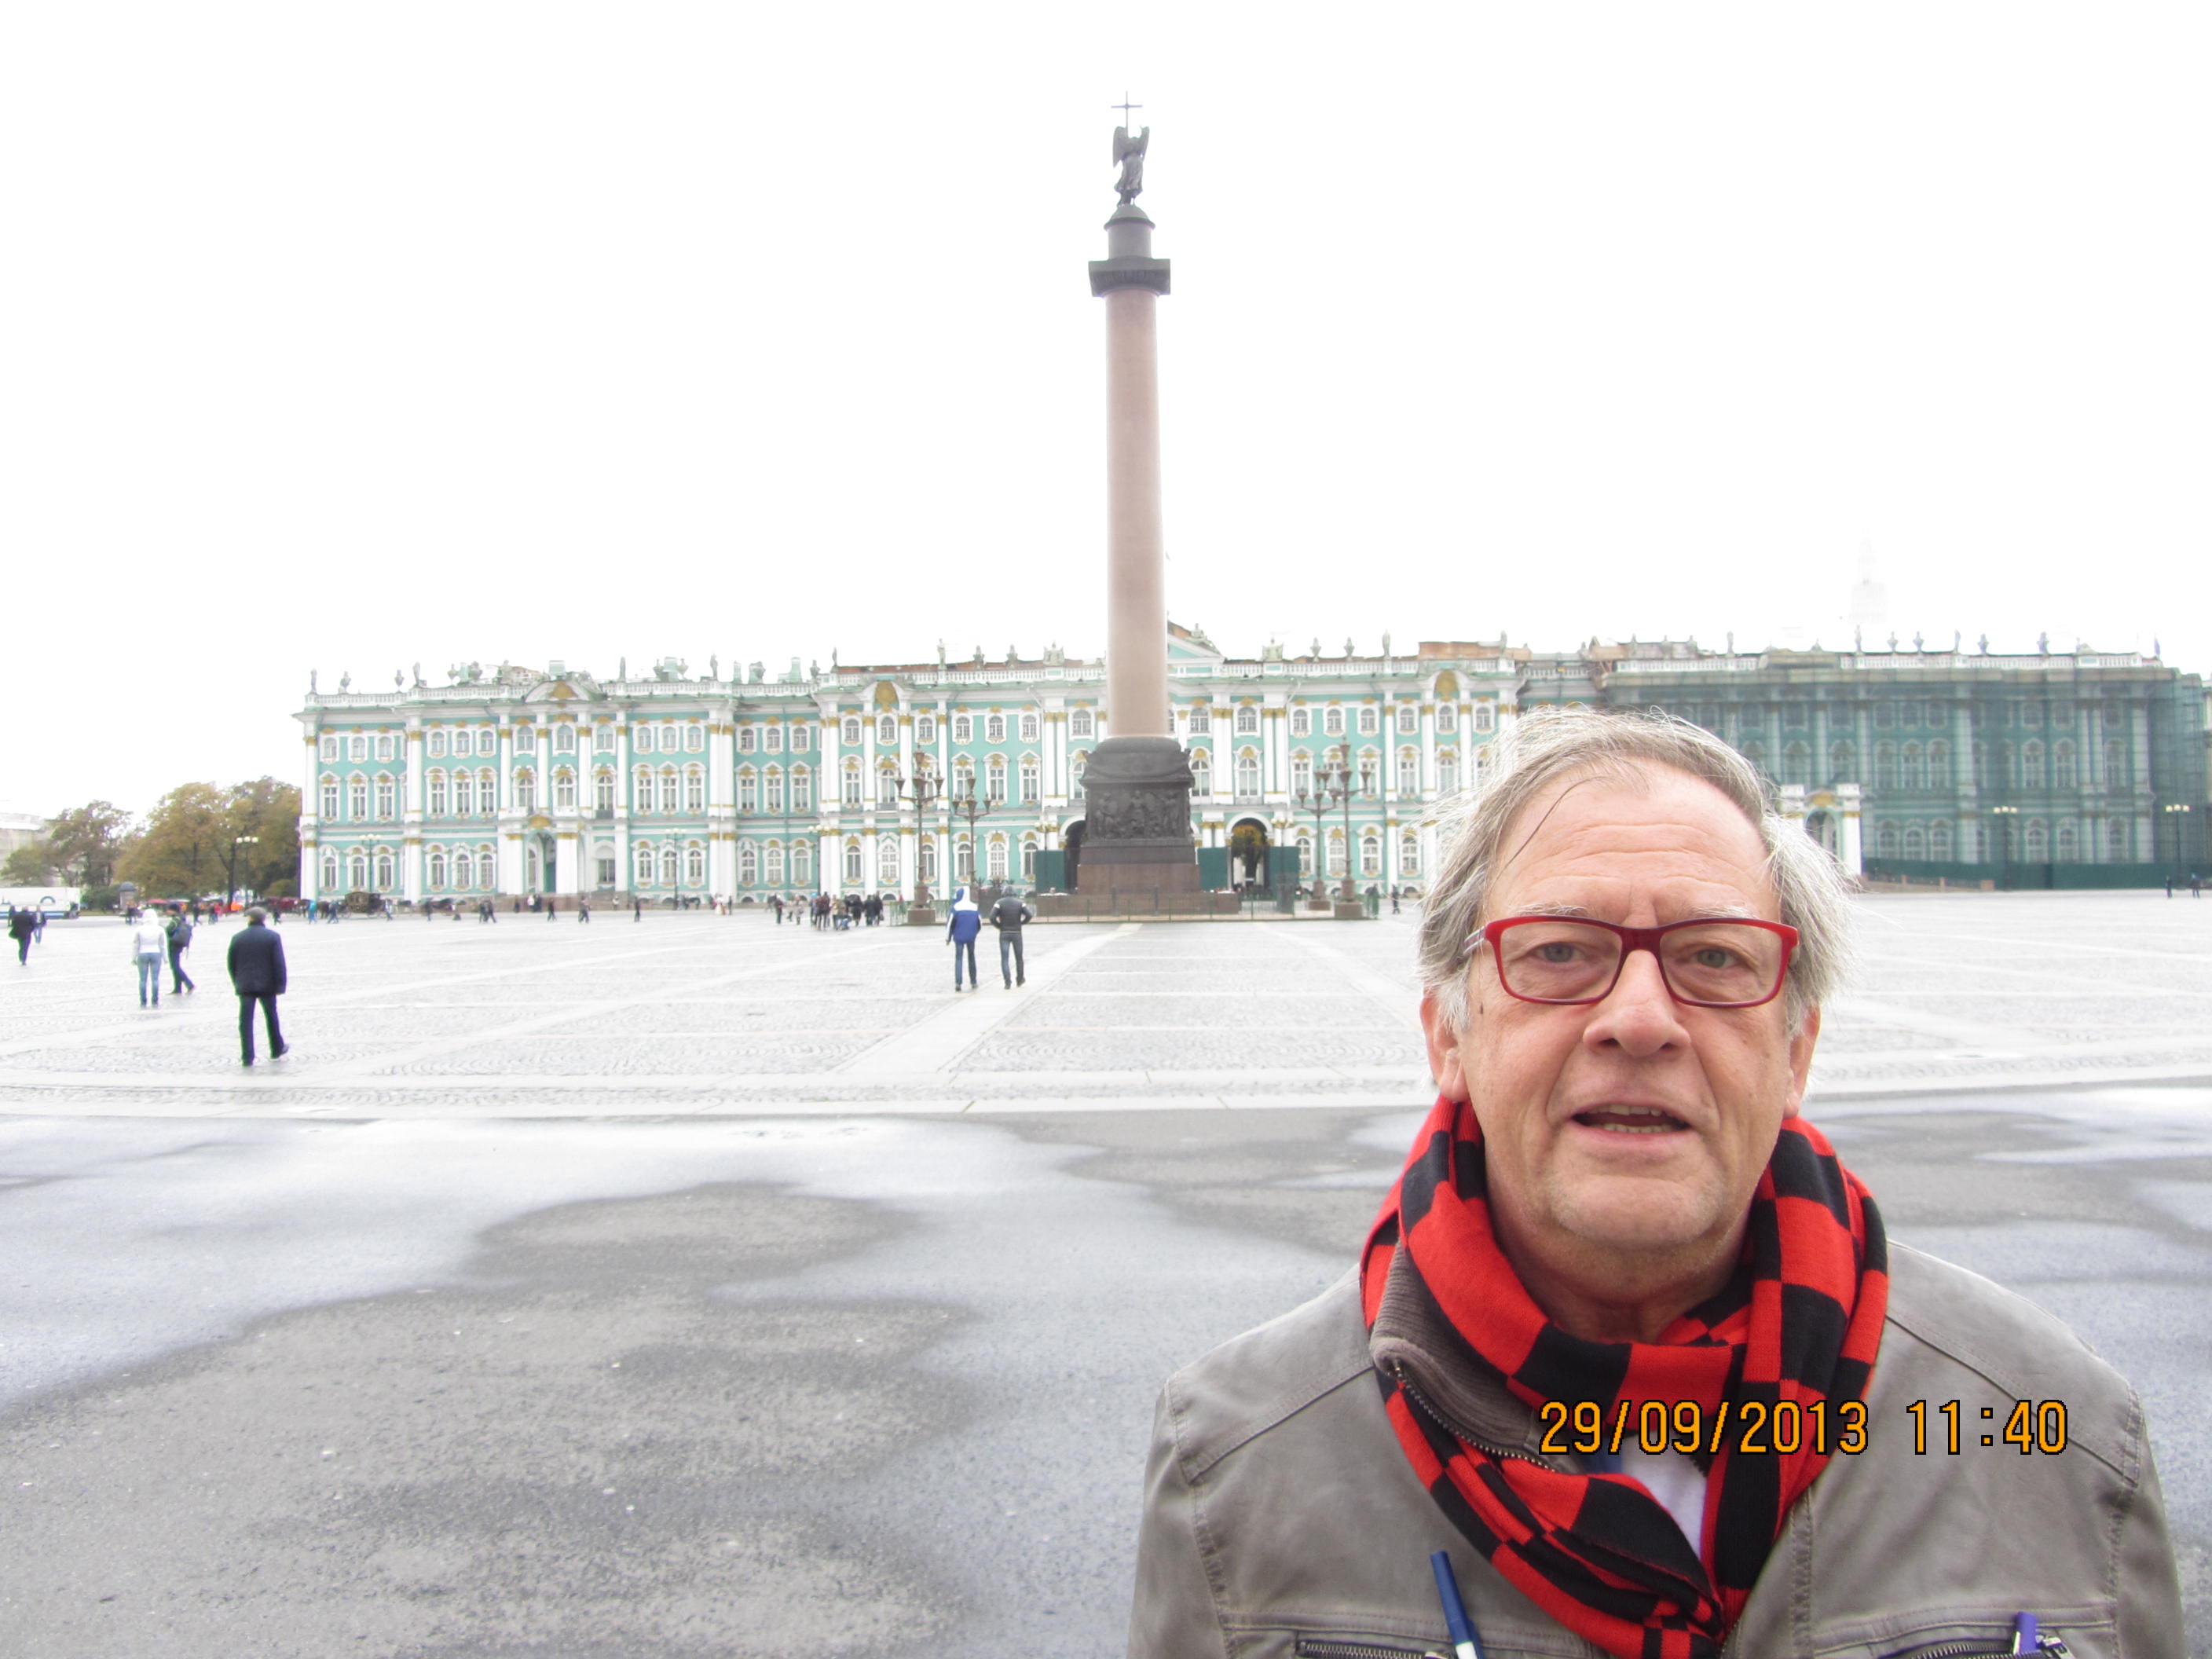 outside the hermitage in St Petersburg